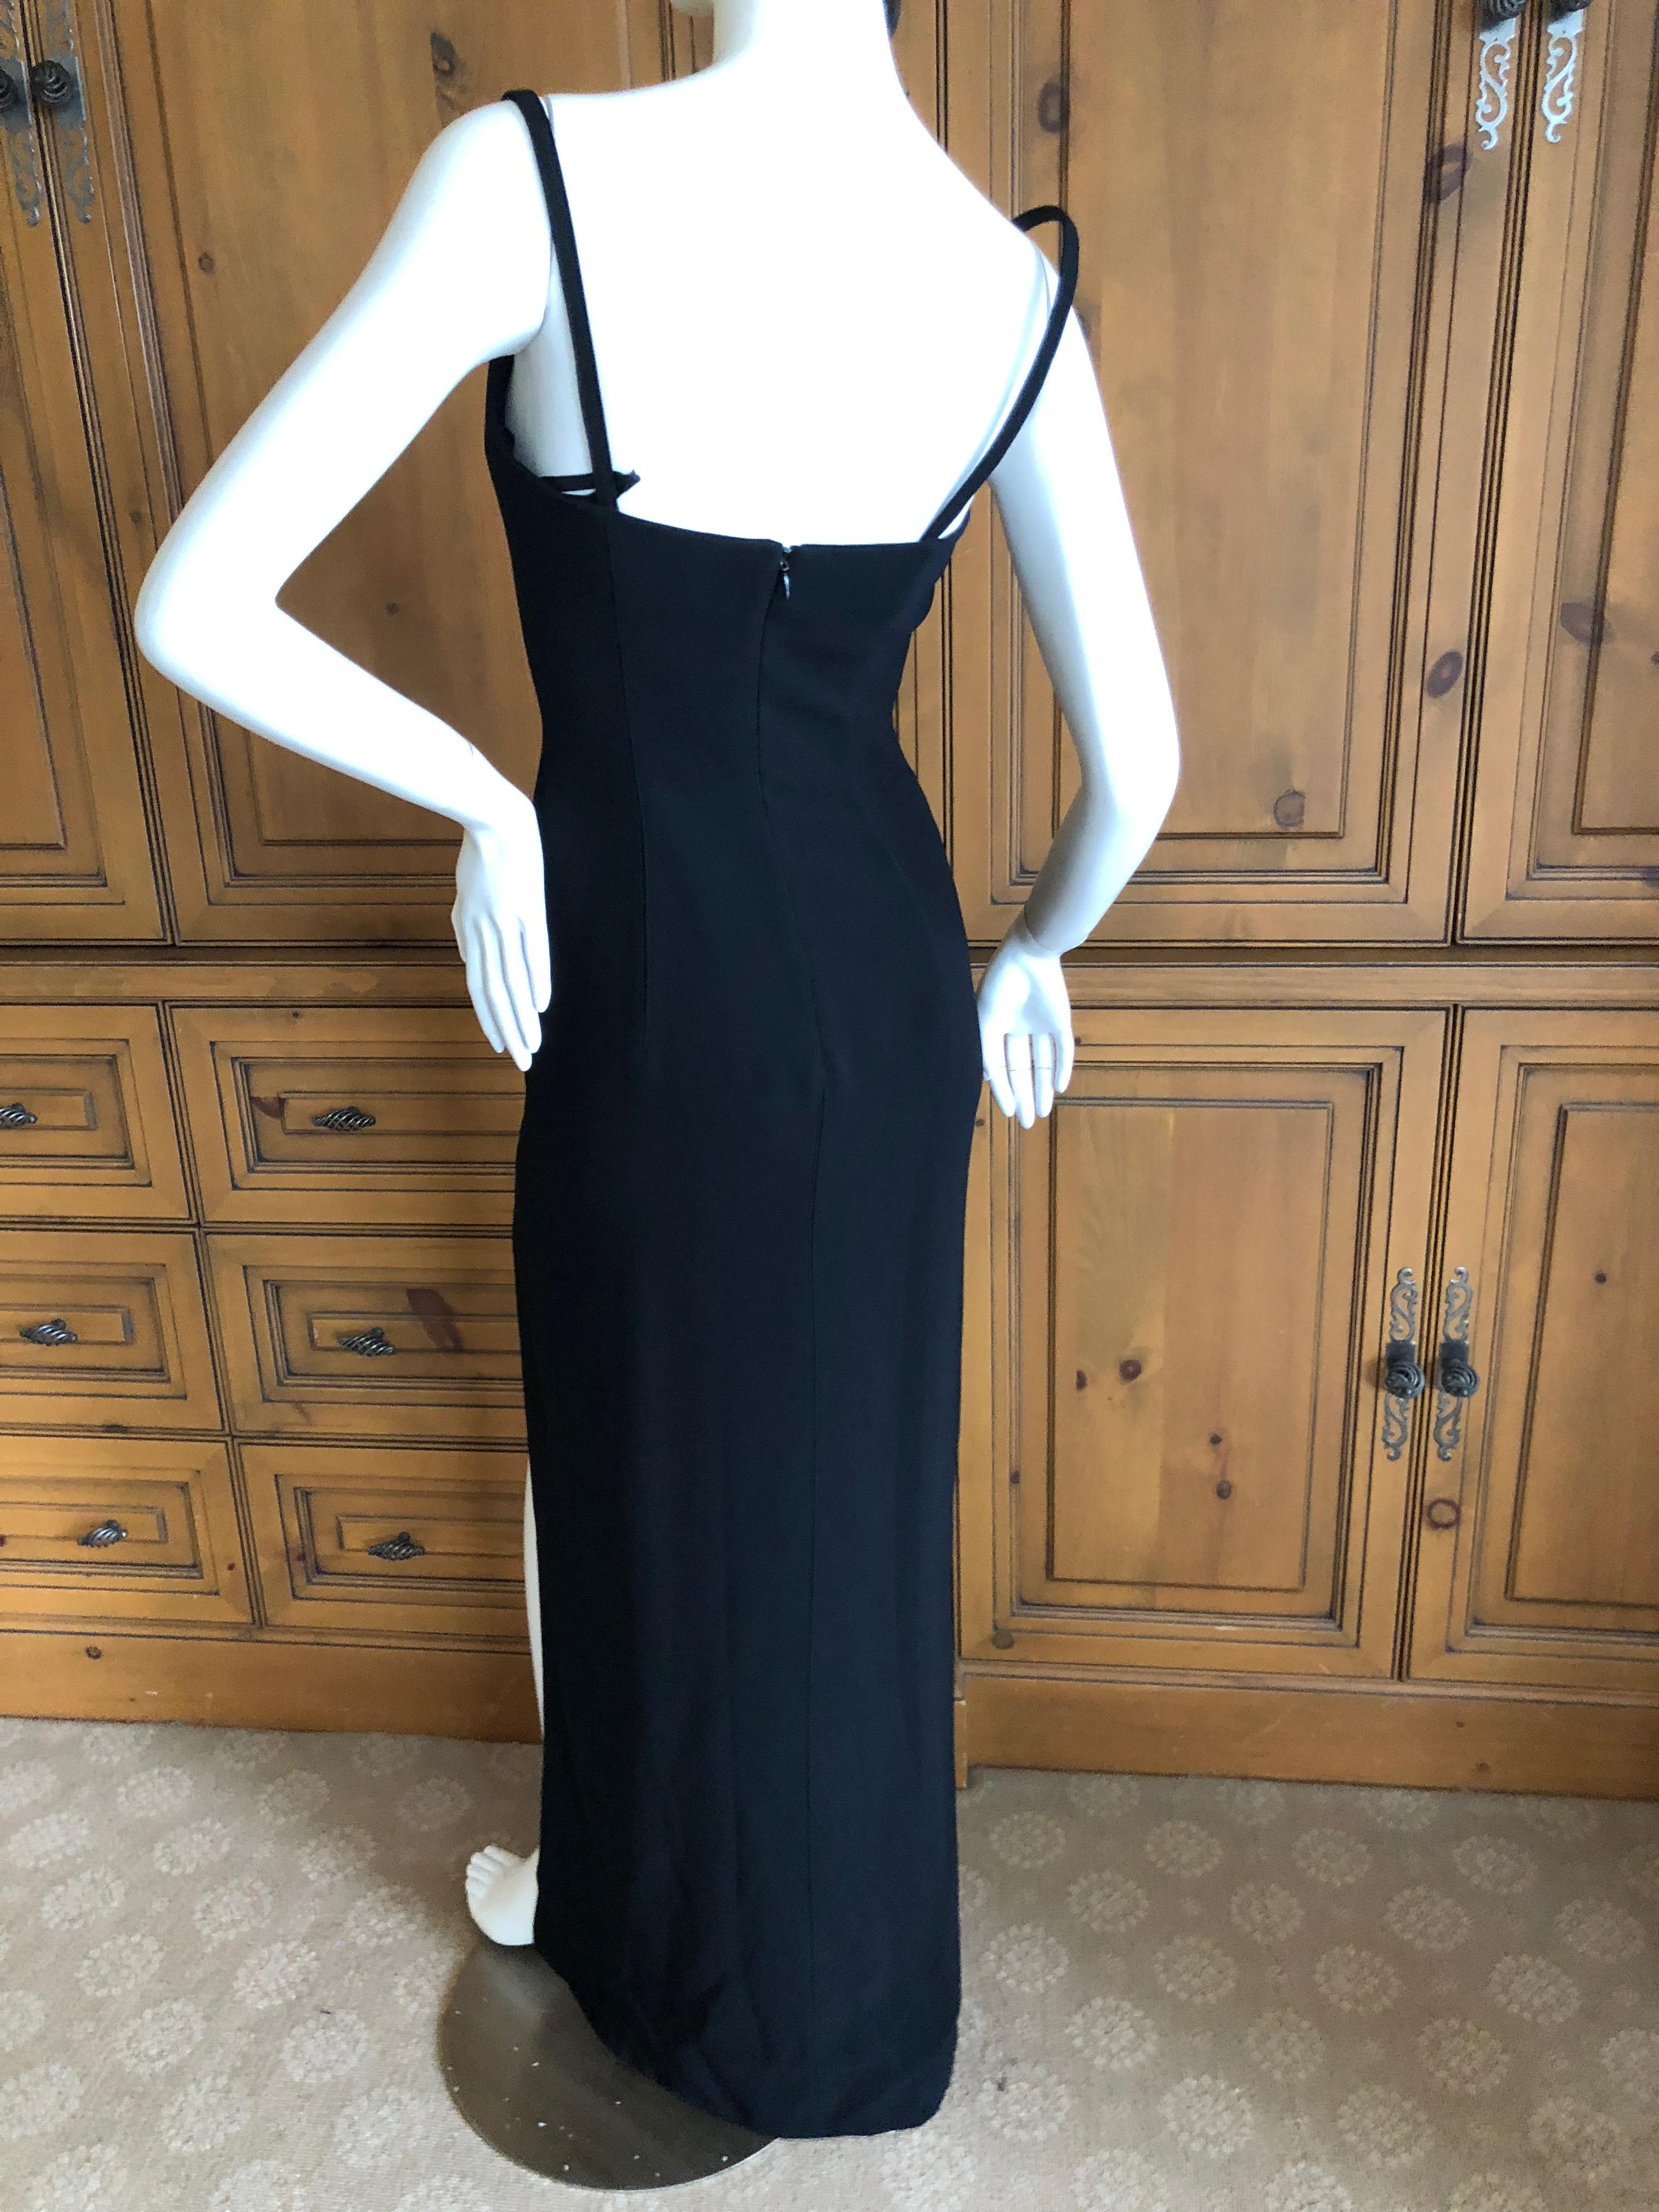 Thierry Mugler Black Vintage Evening Dress with Electric Blue Silk Lining In Excellent Condition For Sale In Cloverdale, CA